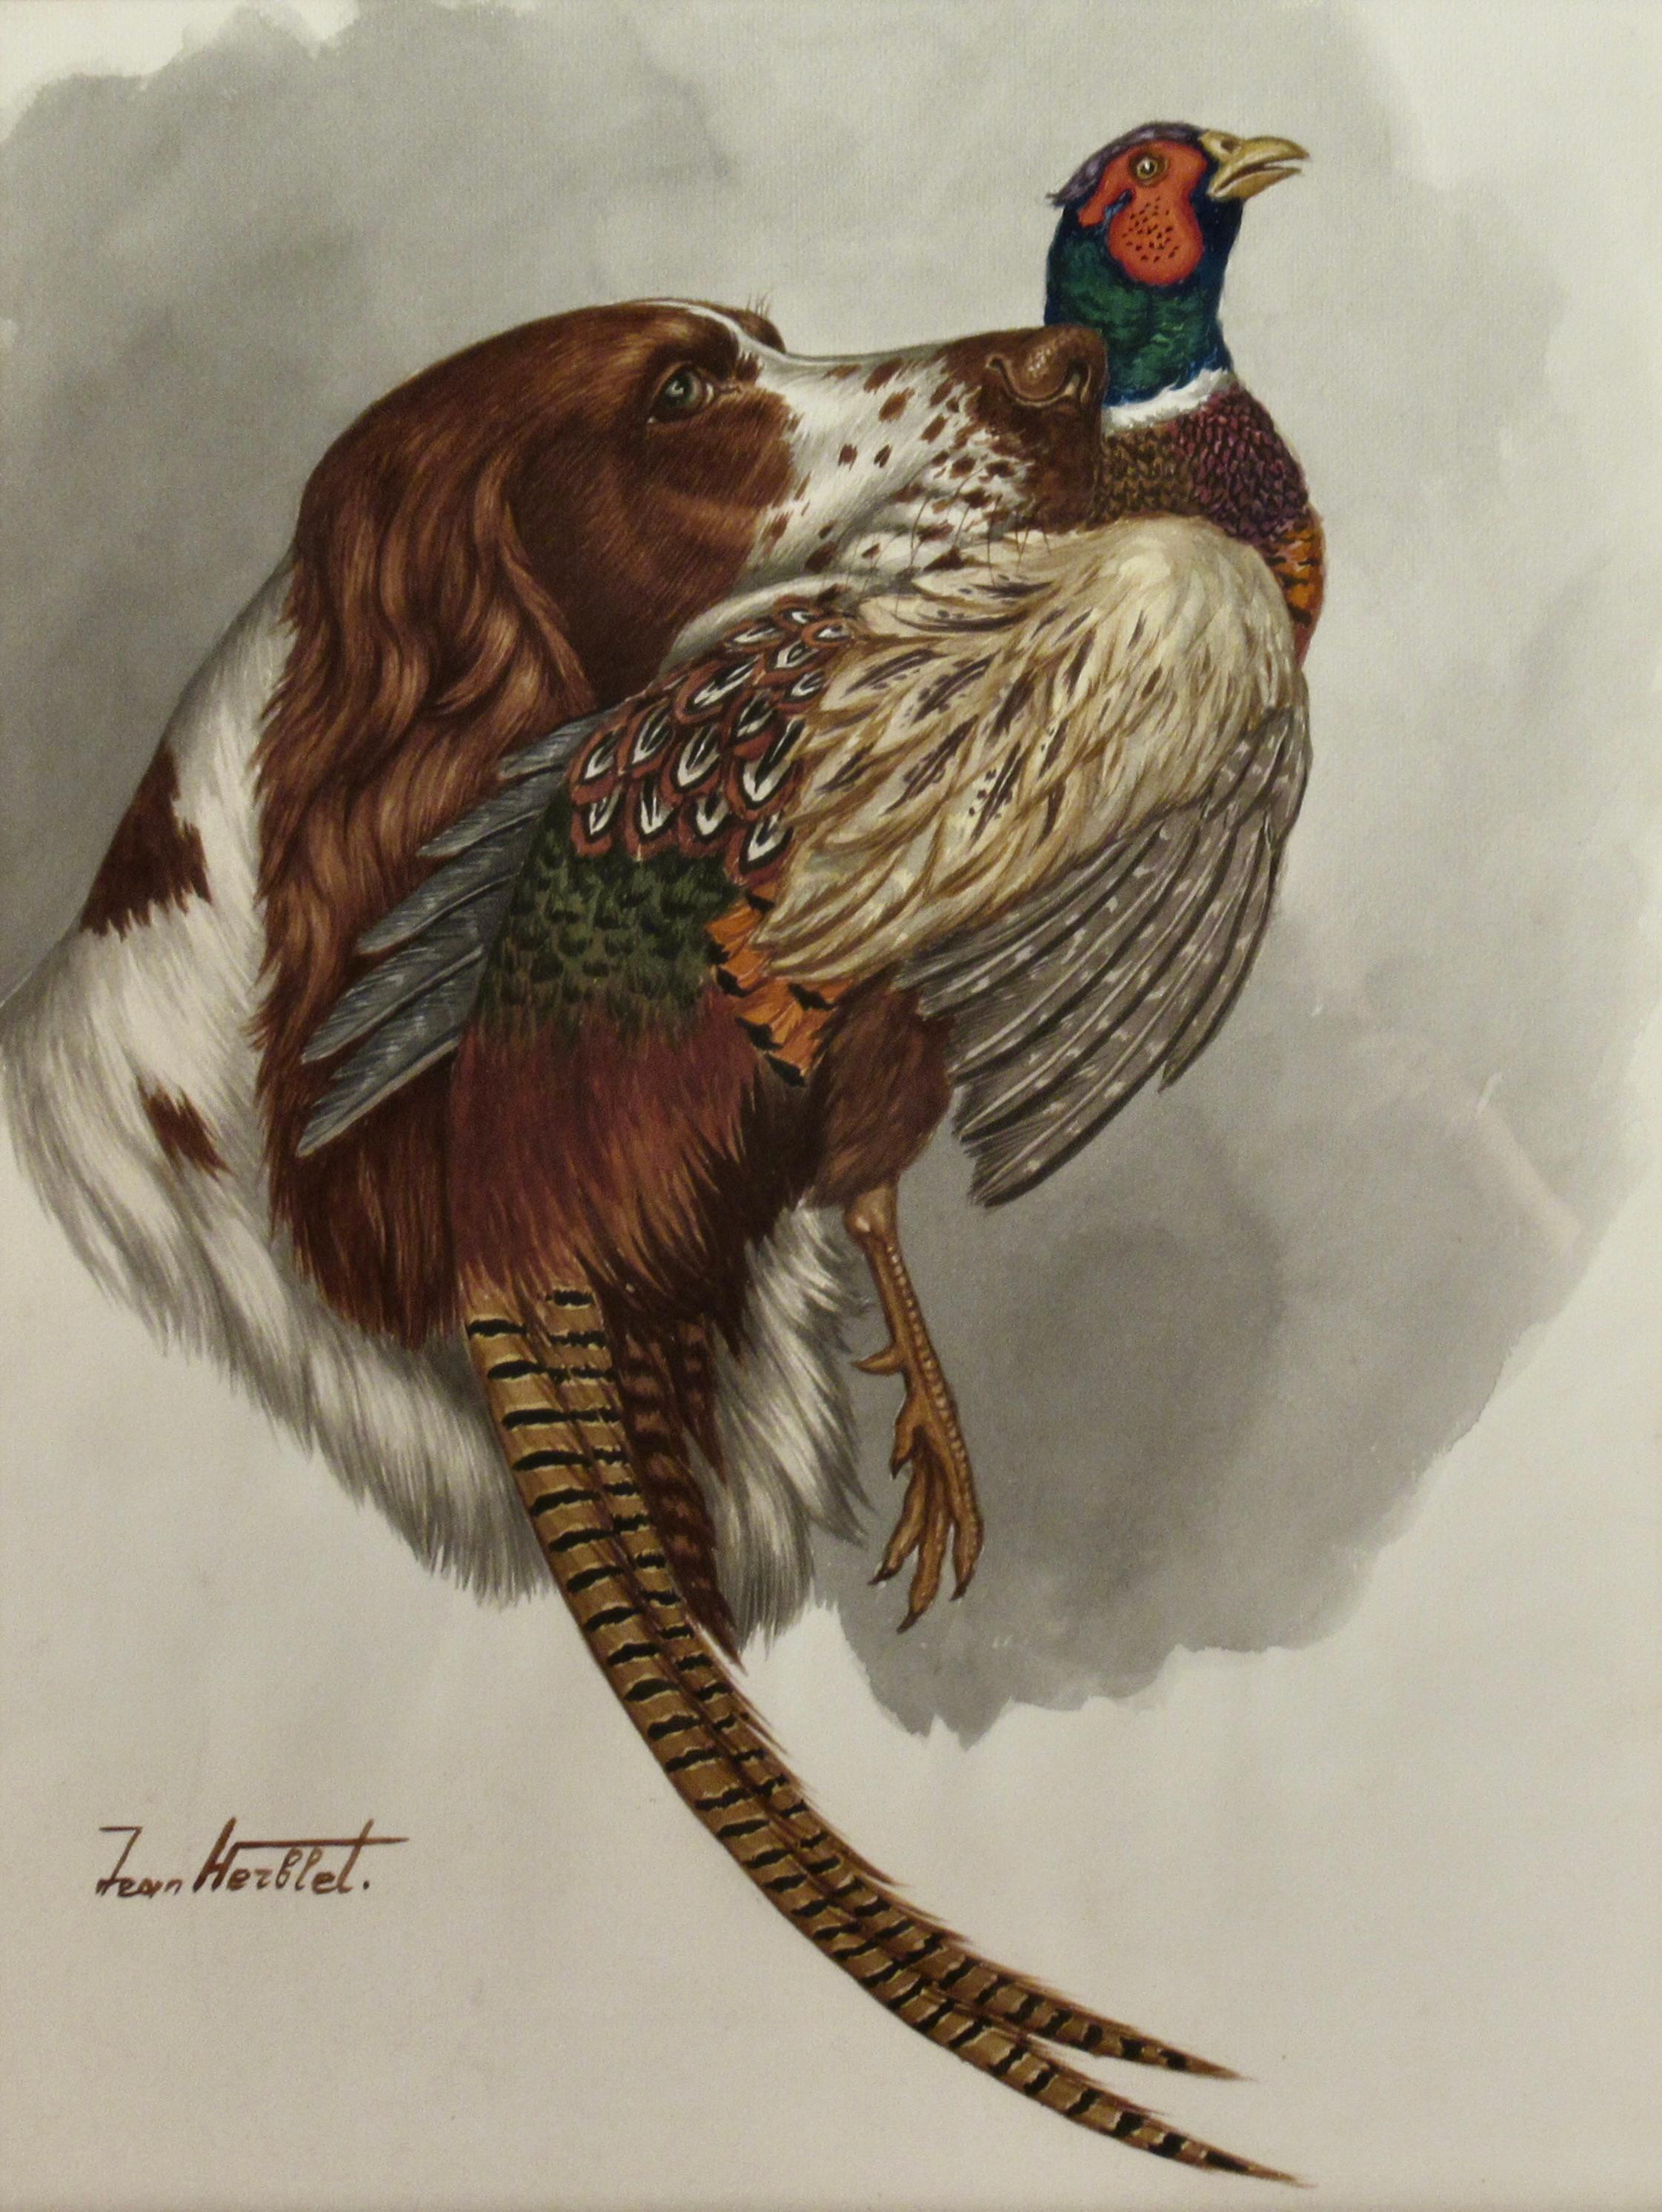 Brittany Spaniel with Pheasant - Art by Jean Herblet